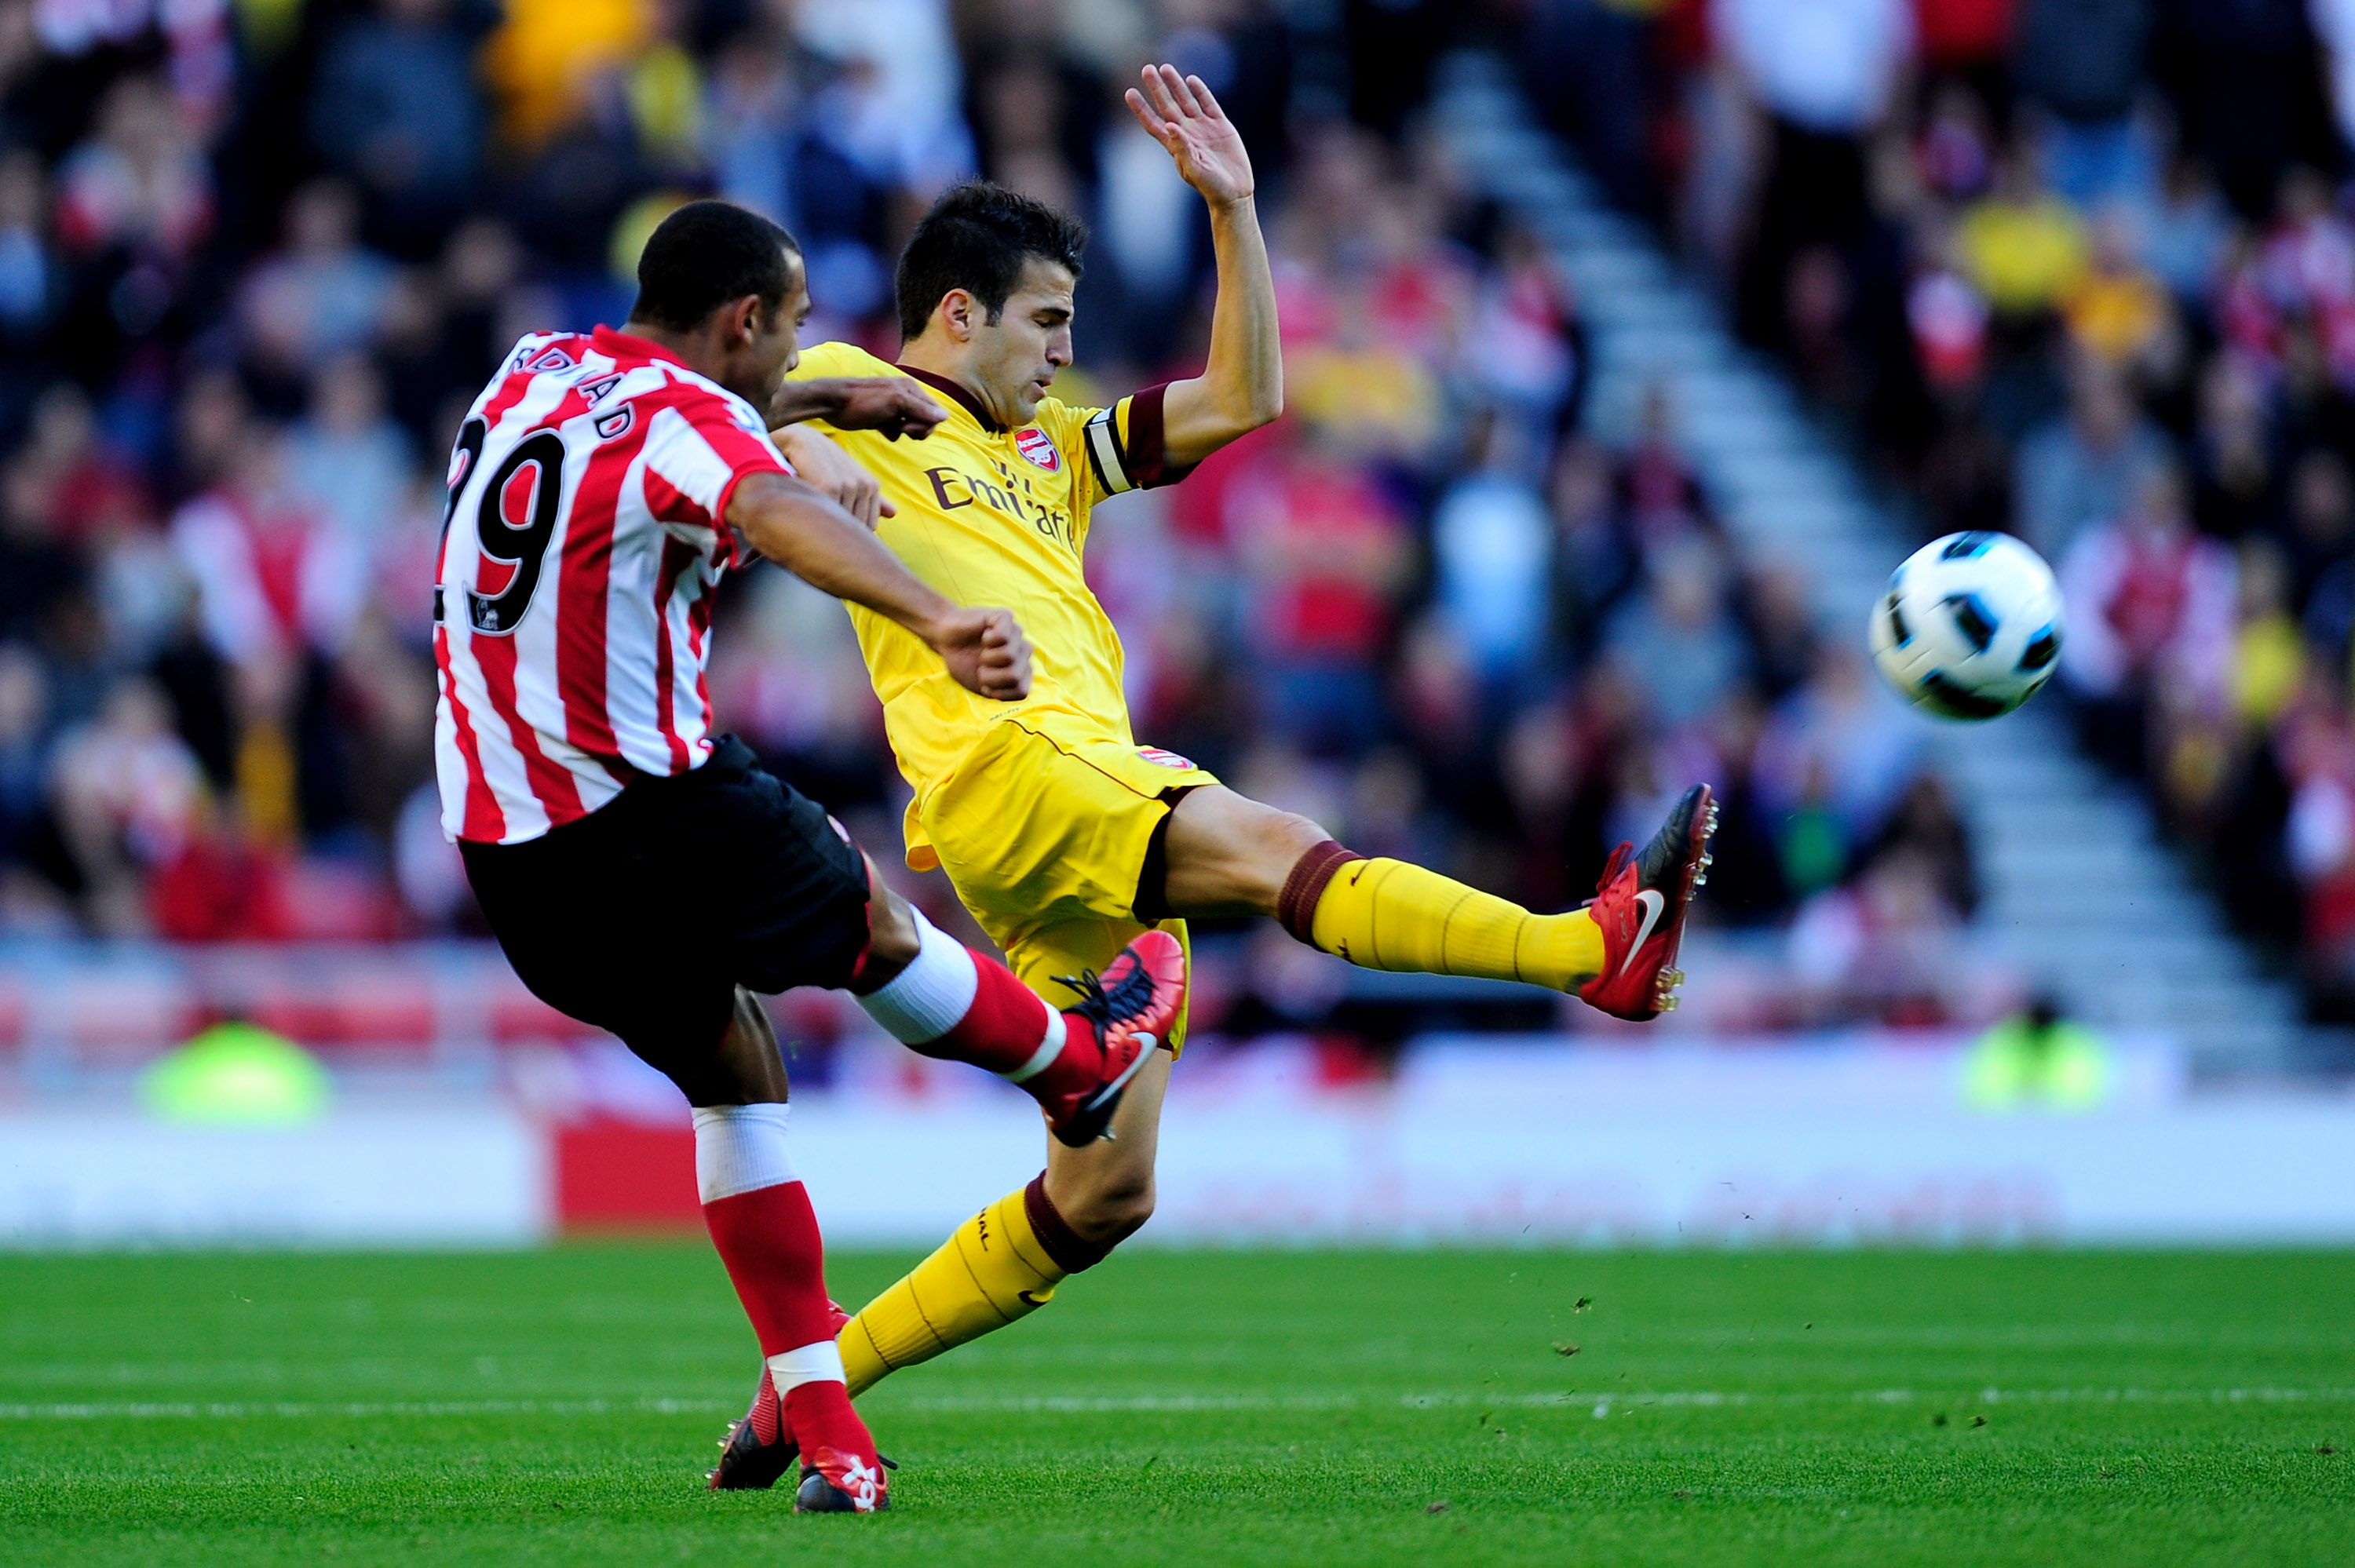 SUNDERLAND, ENGLAND - SEPTEMBER 18: Cesc Fabregas of Arsenal scores the opening goal during the Barclays Premier League match between Sunderland and Arsenal at the Stadium of Light on September 18, 2010 in Sunderland, England. (Photo by Jamie McDonald/Get